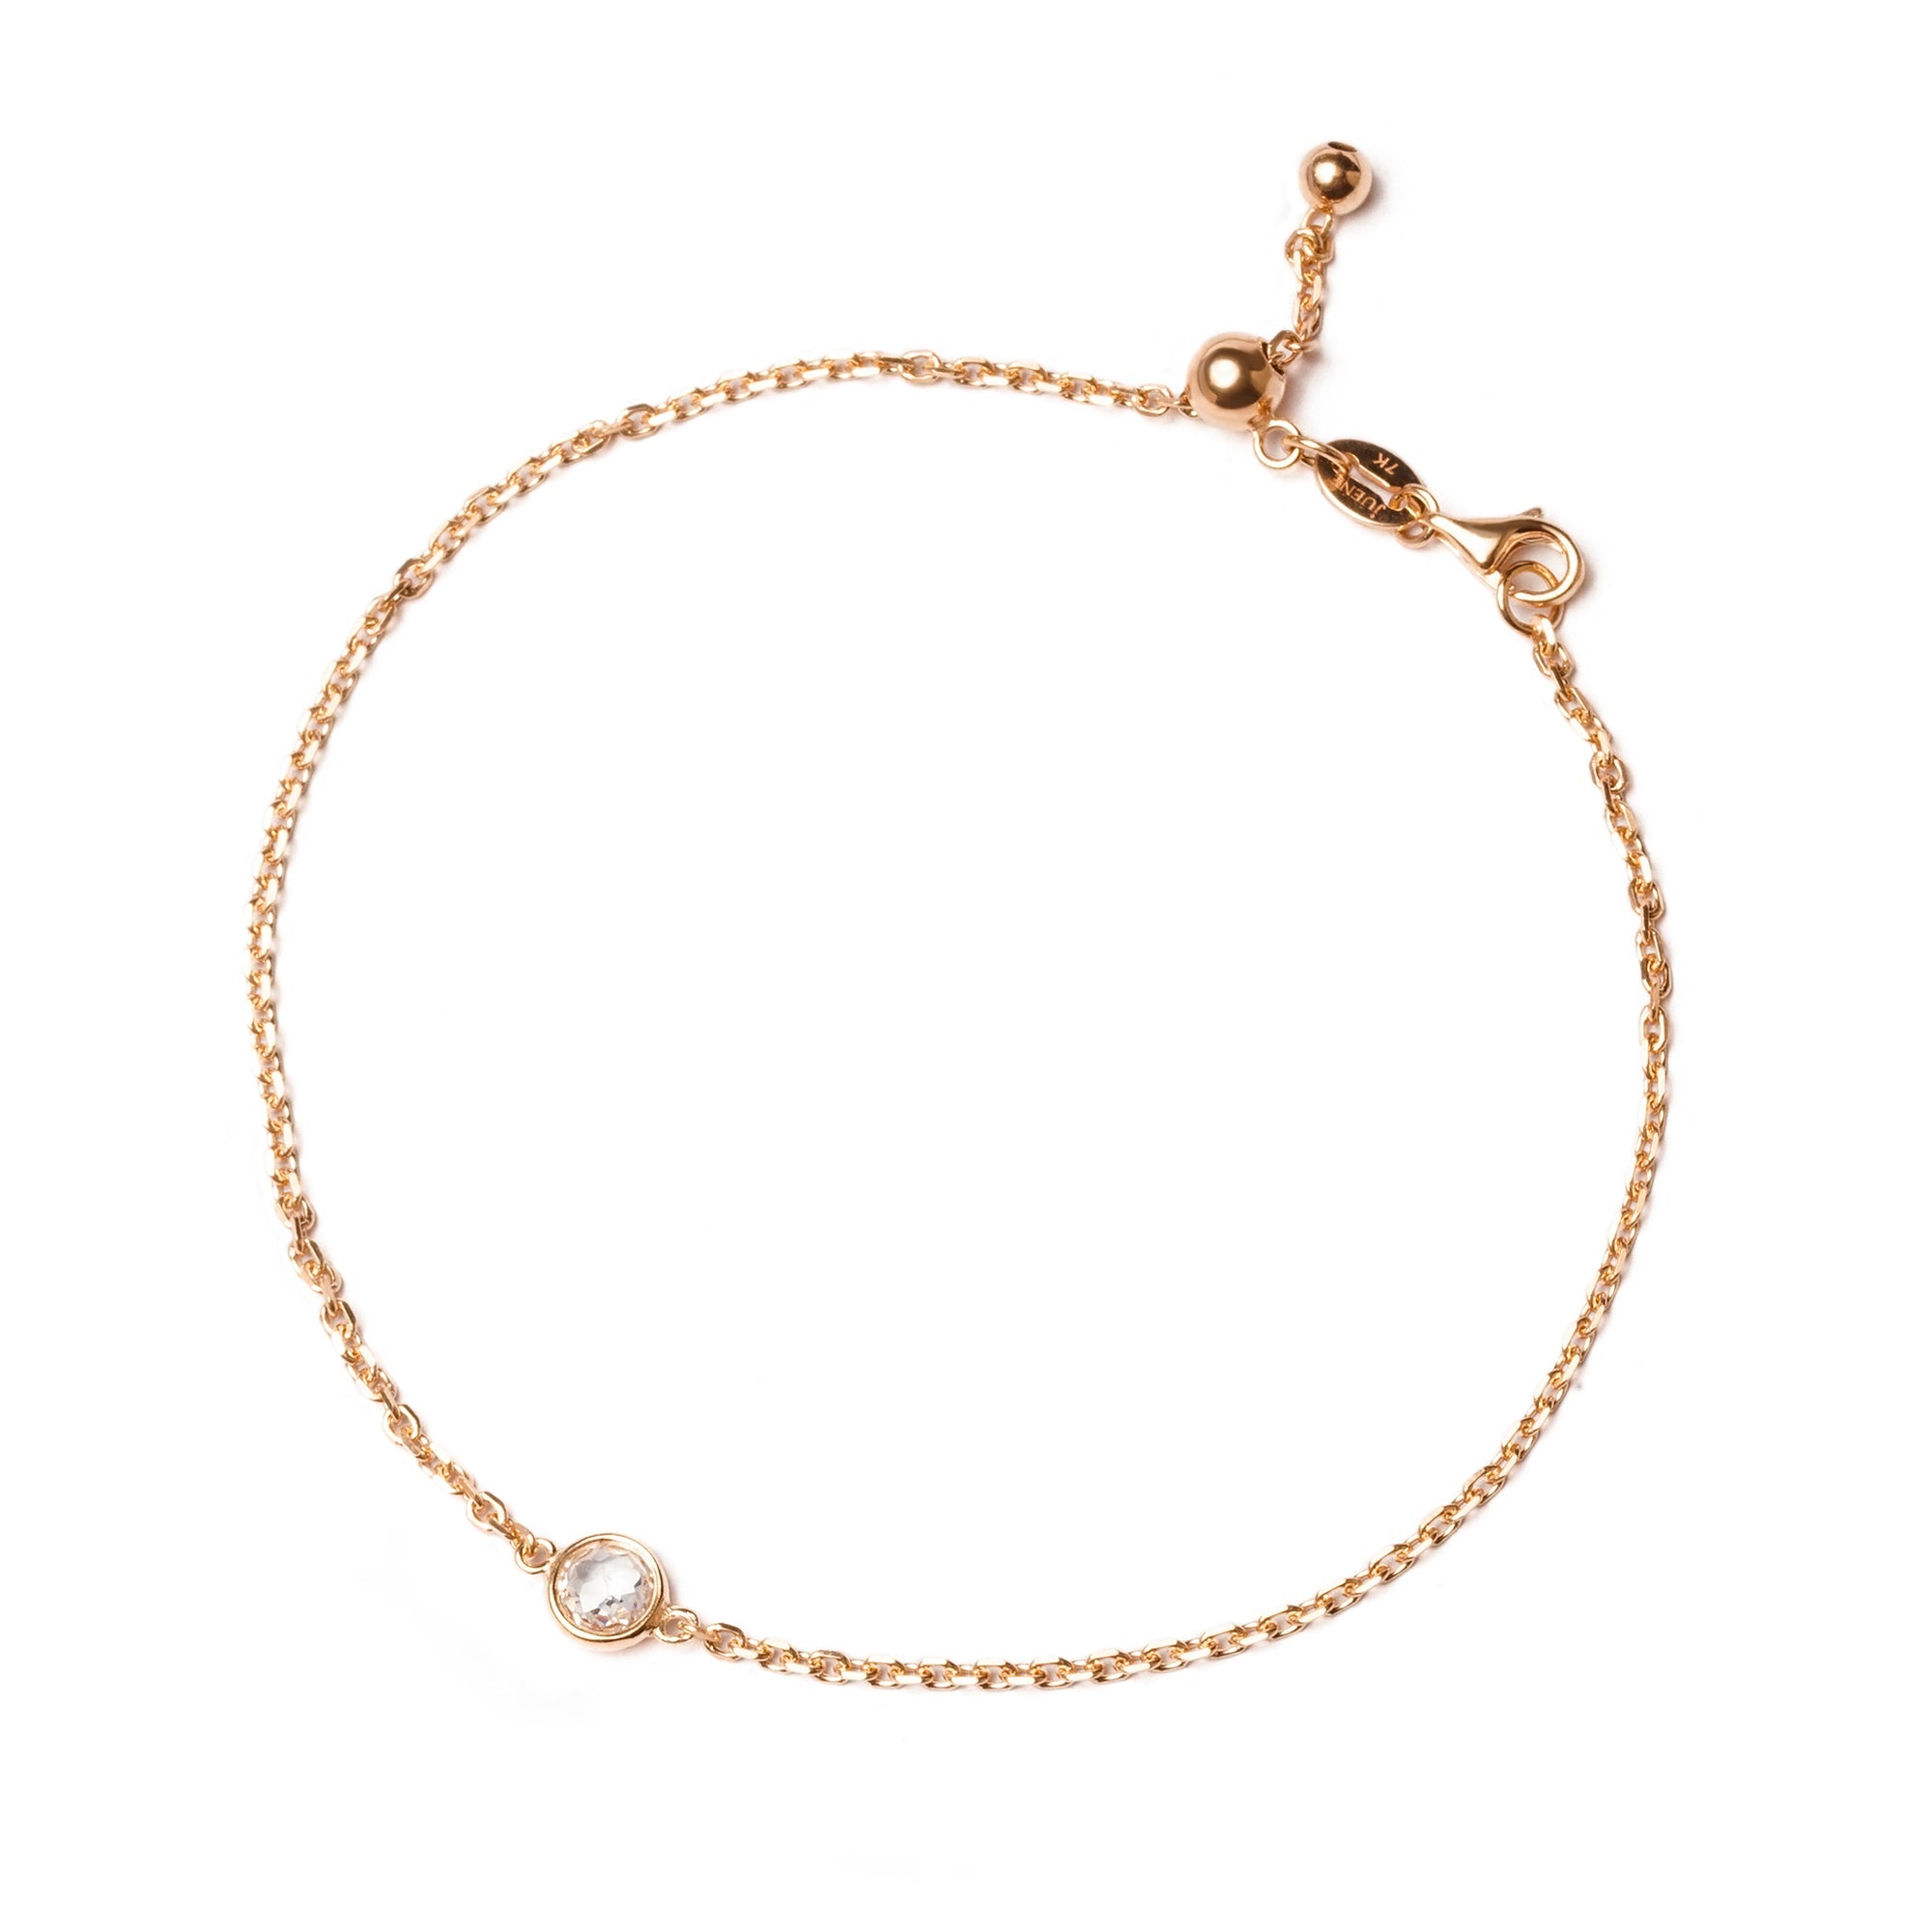 Helice Gold Bracelet - Dazzling Juene Collection - Juene Jewelry